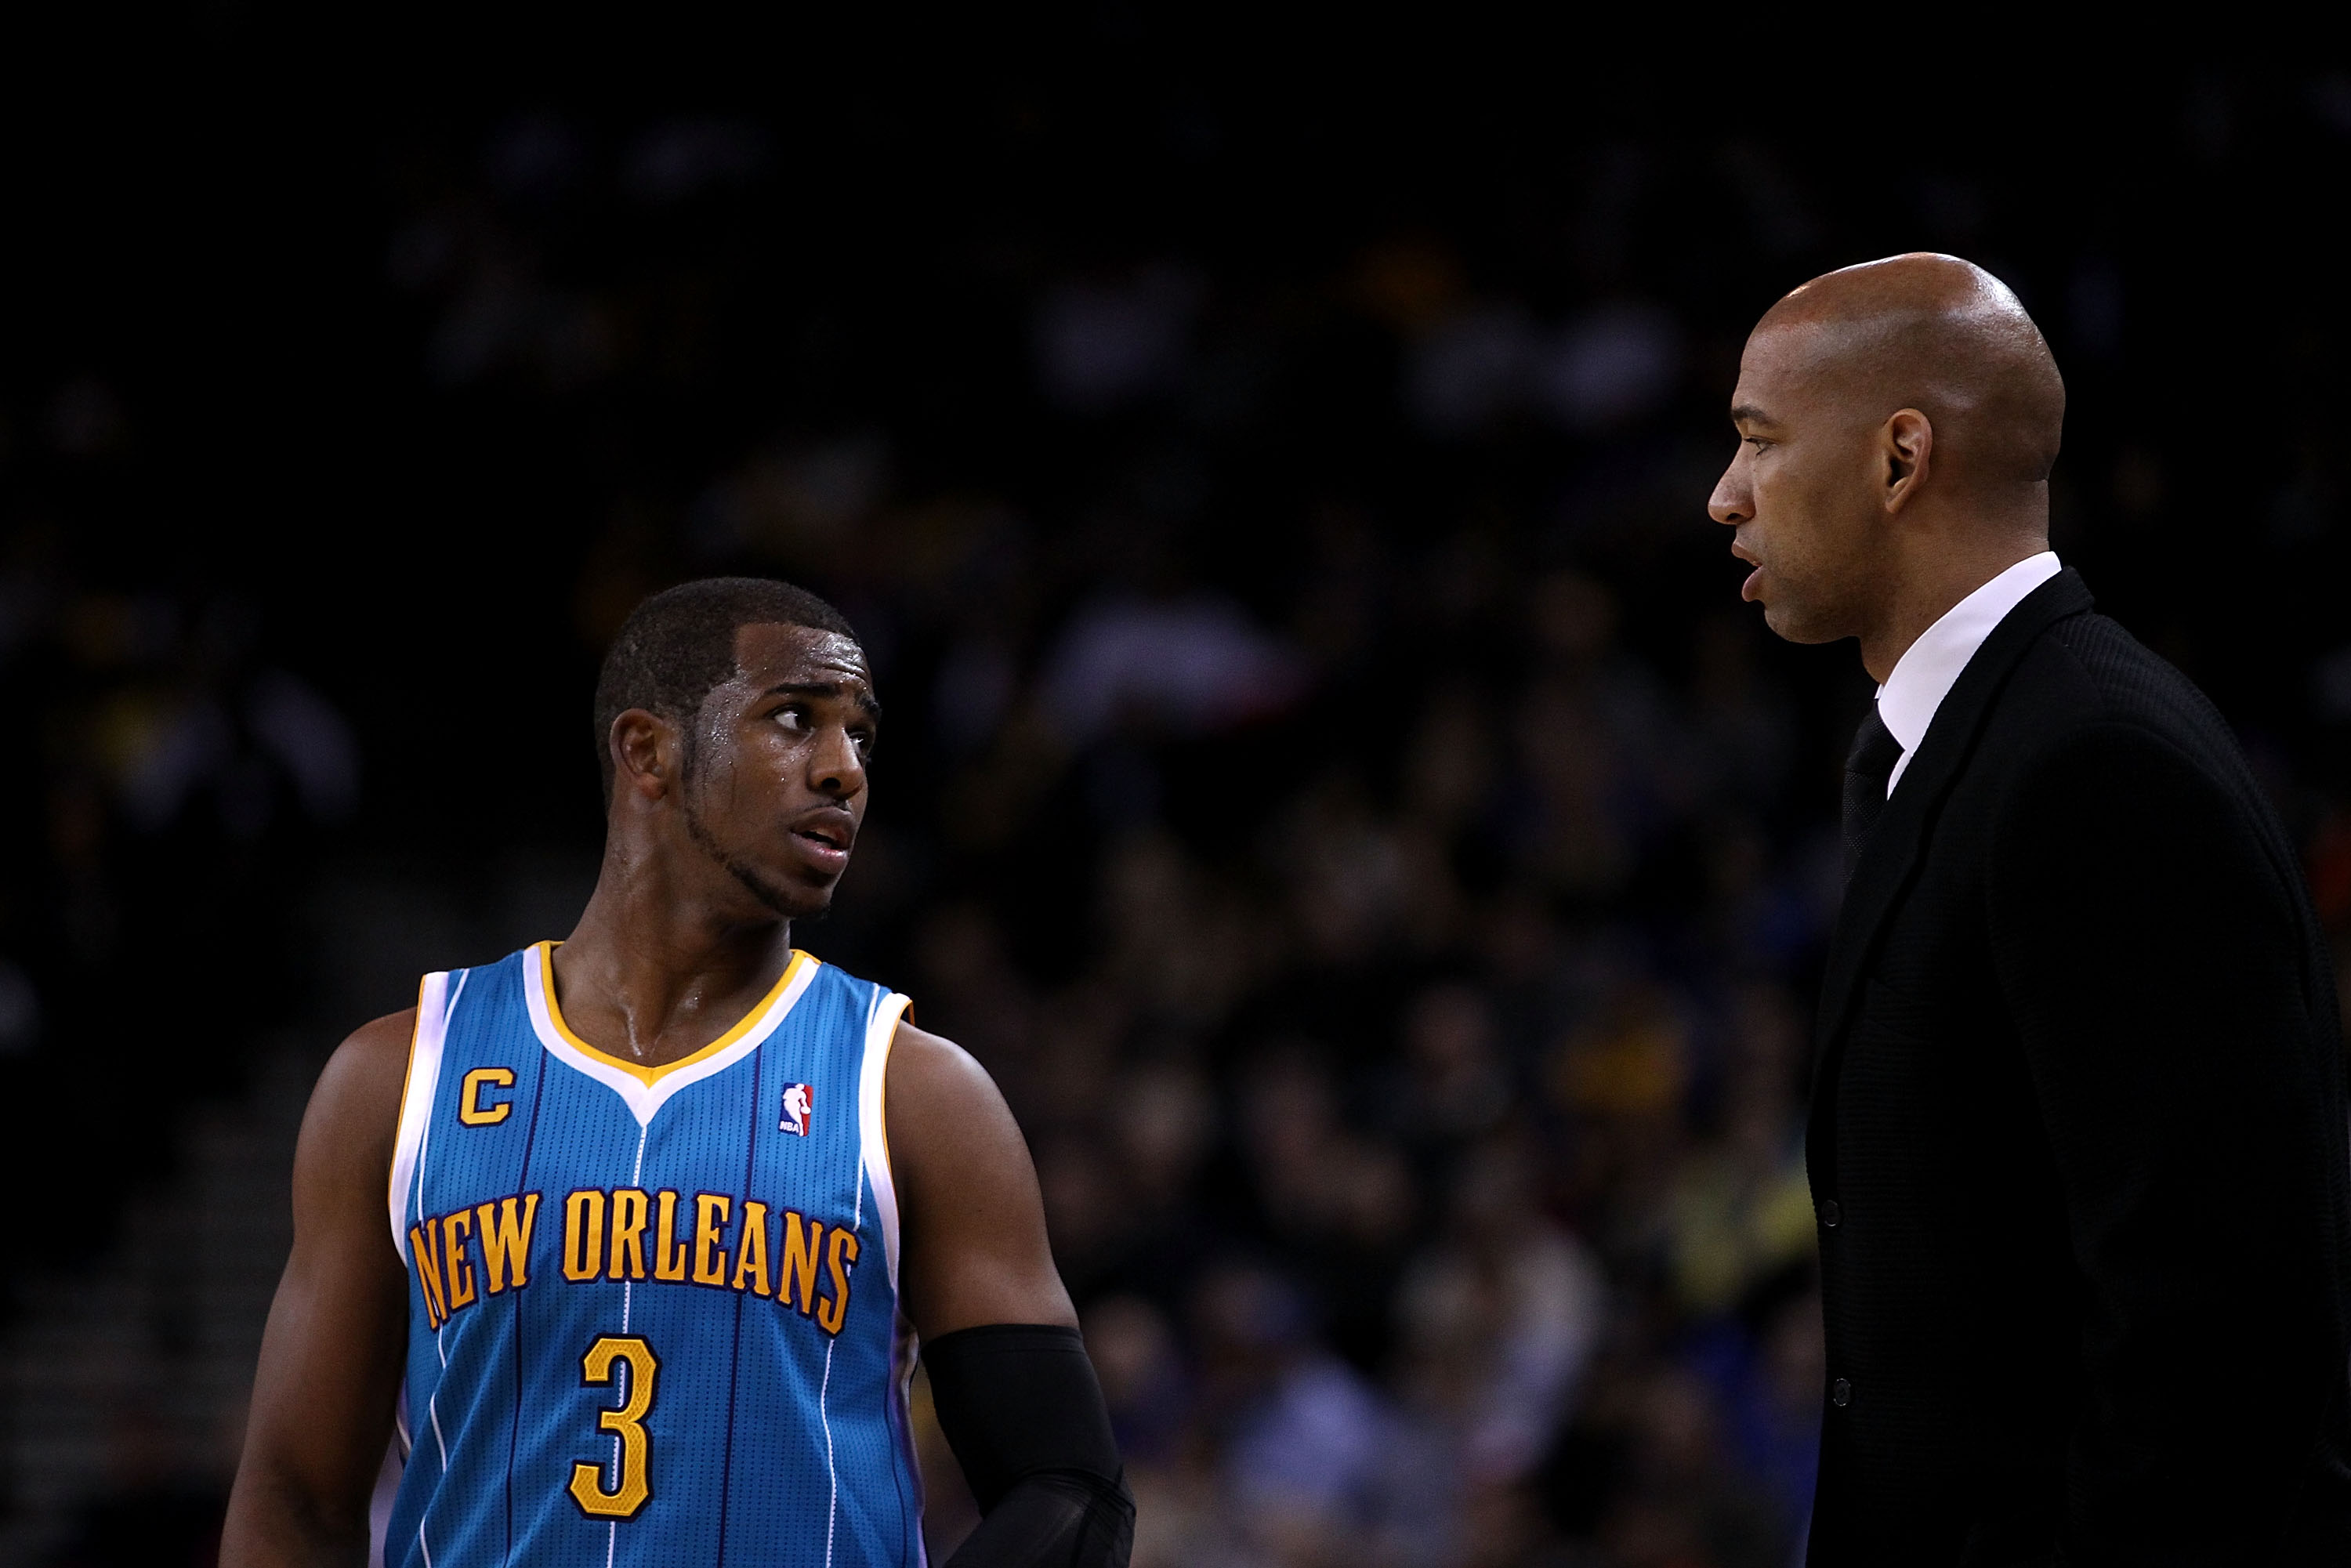 OAKLAND, CA - FEBRUARY 15:  Chris Paul #3 of the New Orleans Hornets speaks to head coach Monty Williams at Oracle Arena on February 15, 2011 in Oakland, California. NOTE TO USER: User expressly acknowledges and agrees that, by downloading and or using th